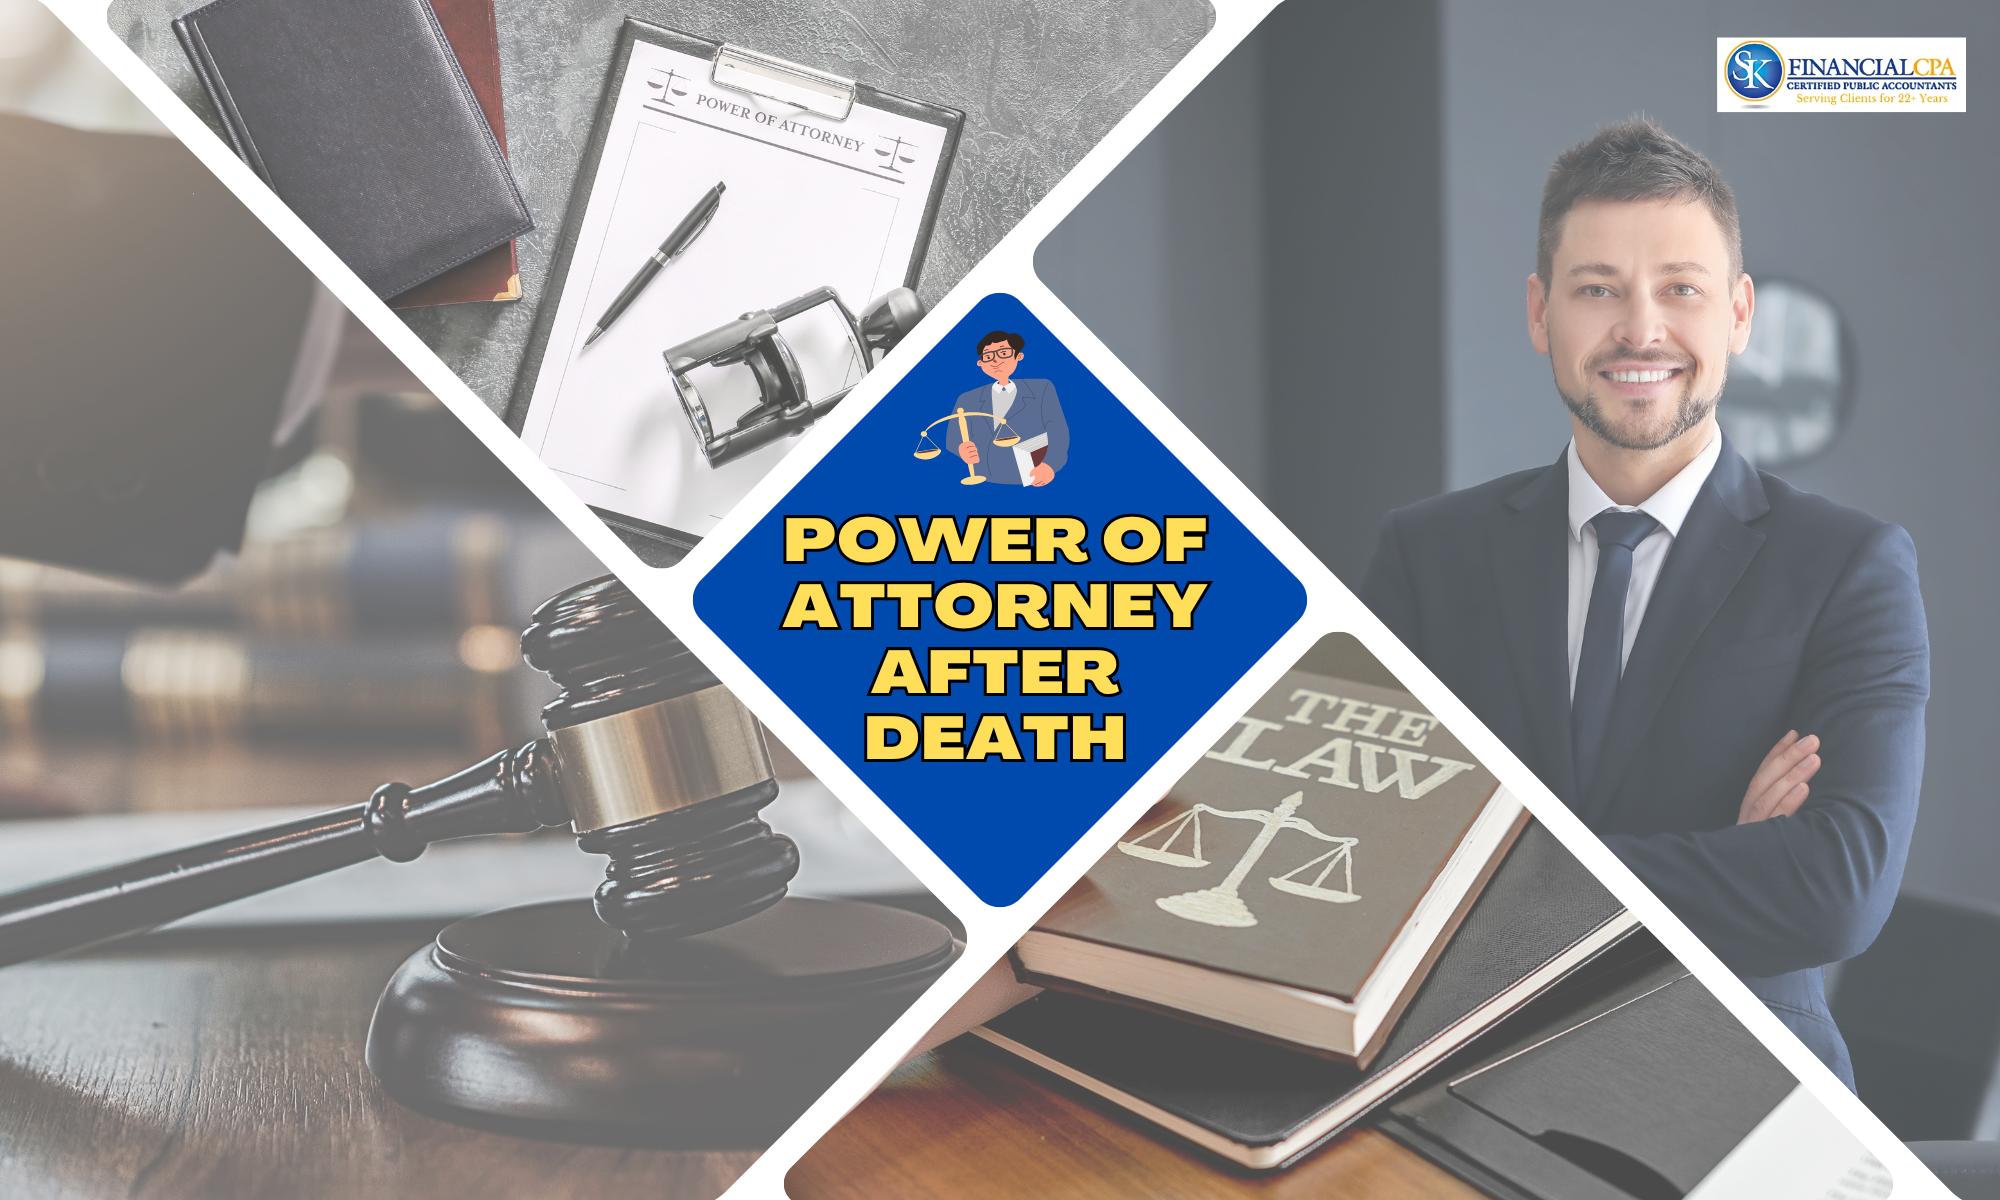 Power of Attorney After Death